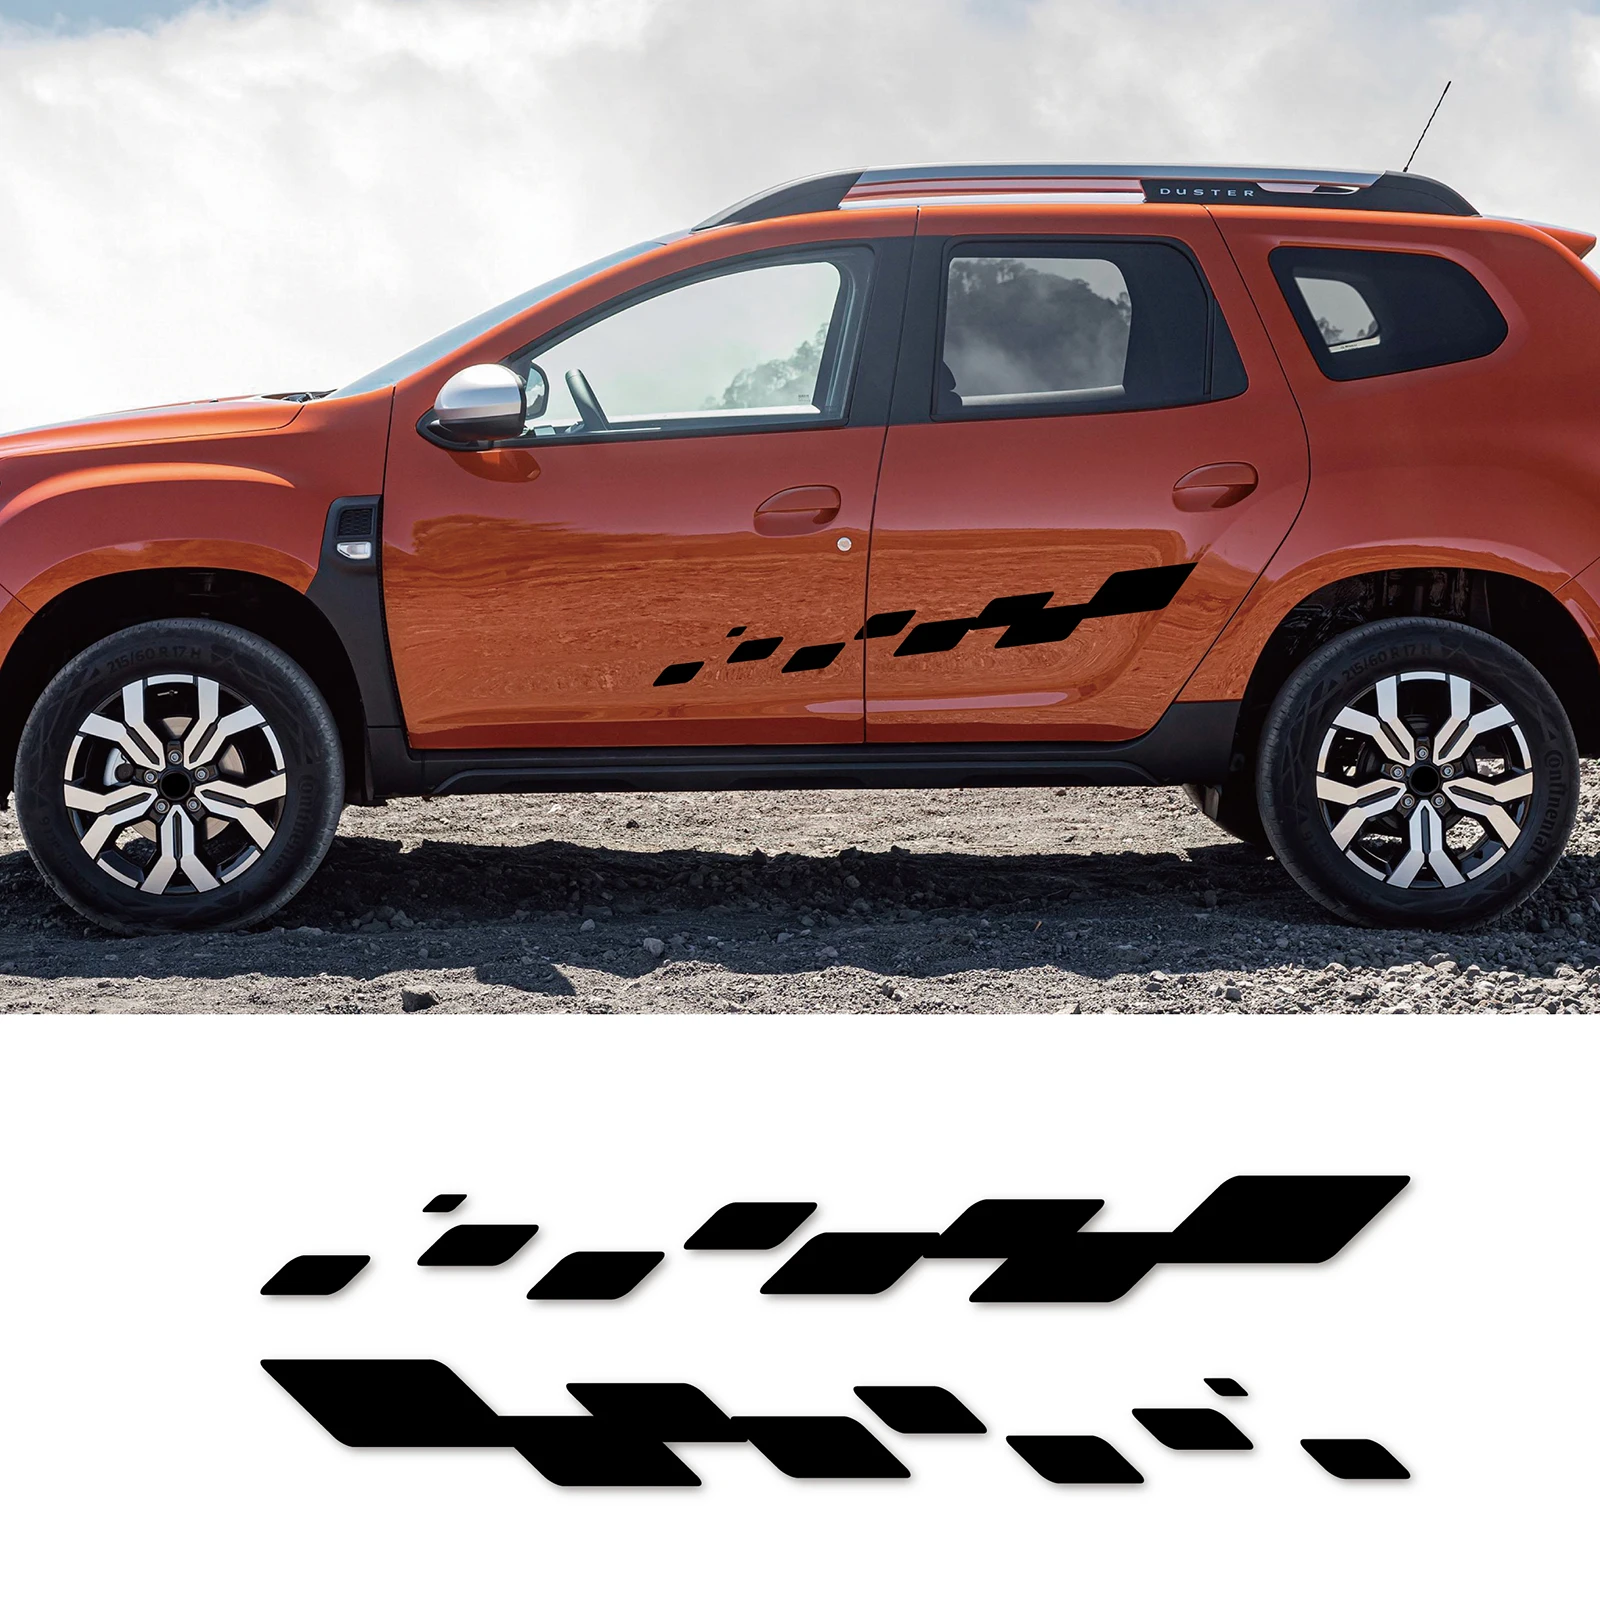 

2pcs Checkered Pattern Car Stickers Apply for Renault Dacia Duster Decor Auto Both Door Side Decal Accessories